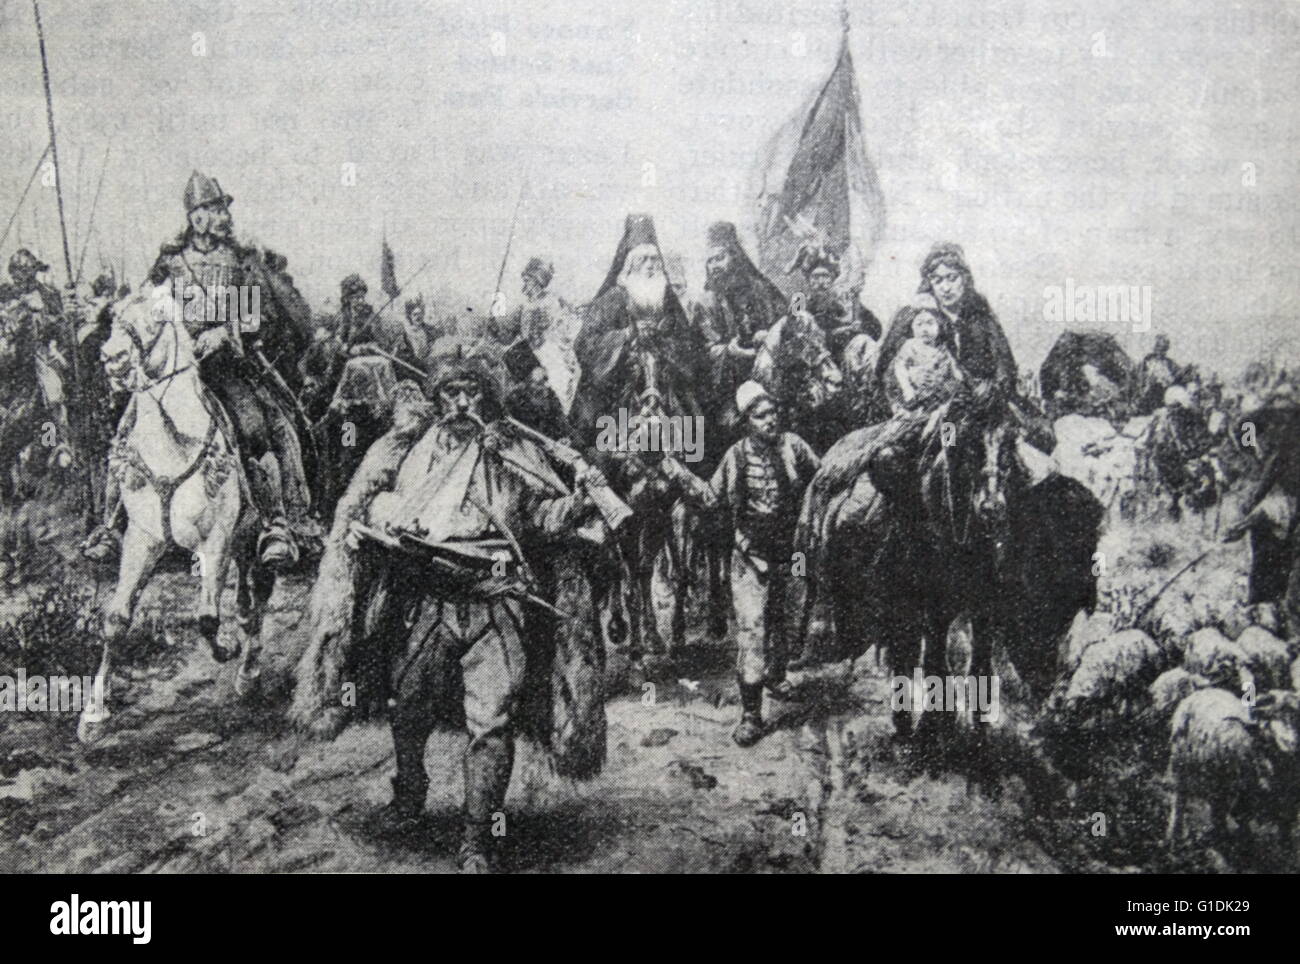 Illustration depicting the Battle of Kosovo, a battle between the army led by the Serbian Prince Lazar Hrebeljanovi?, and the invading army of the Ottoman Empire under the command of Sultan Murad Hüdavendigâr. Dated 14th Century Stock Photo